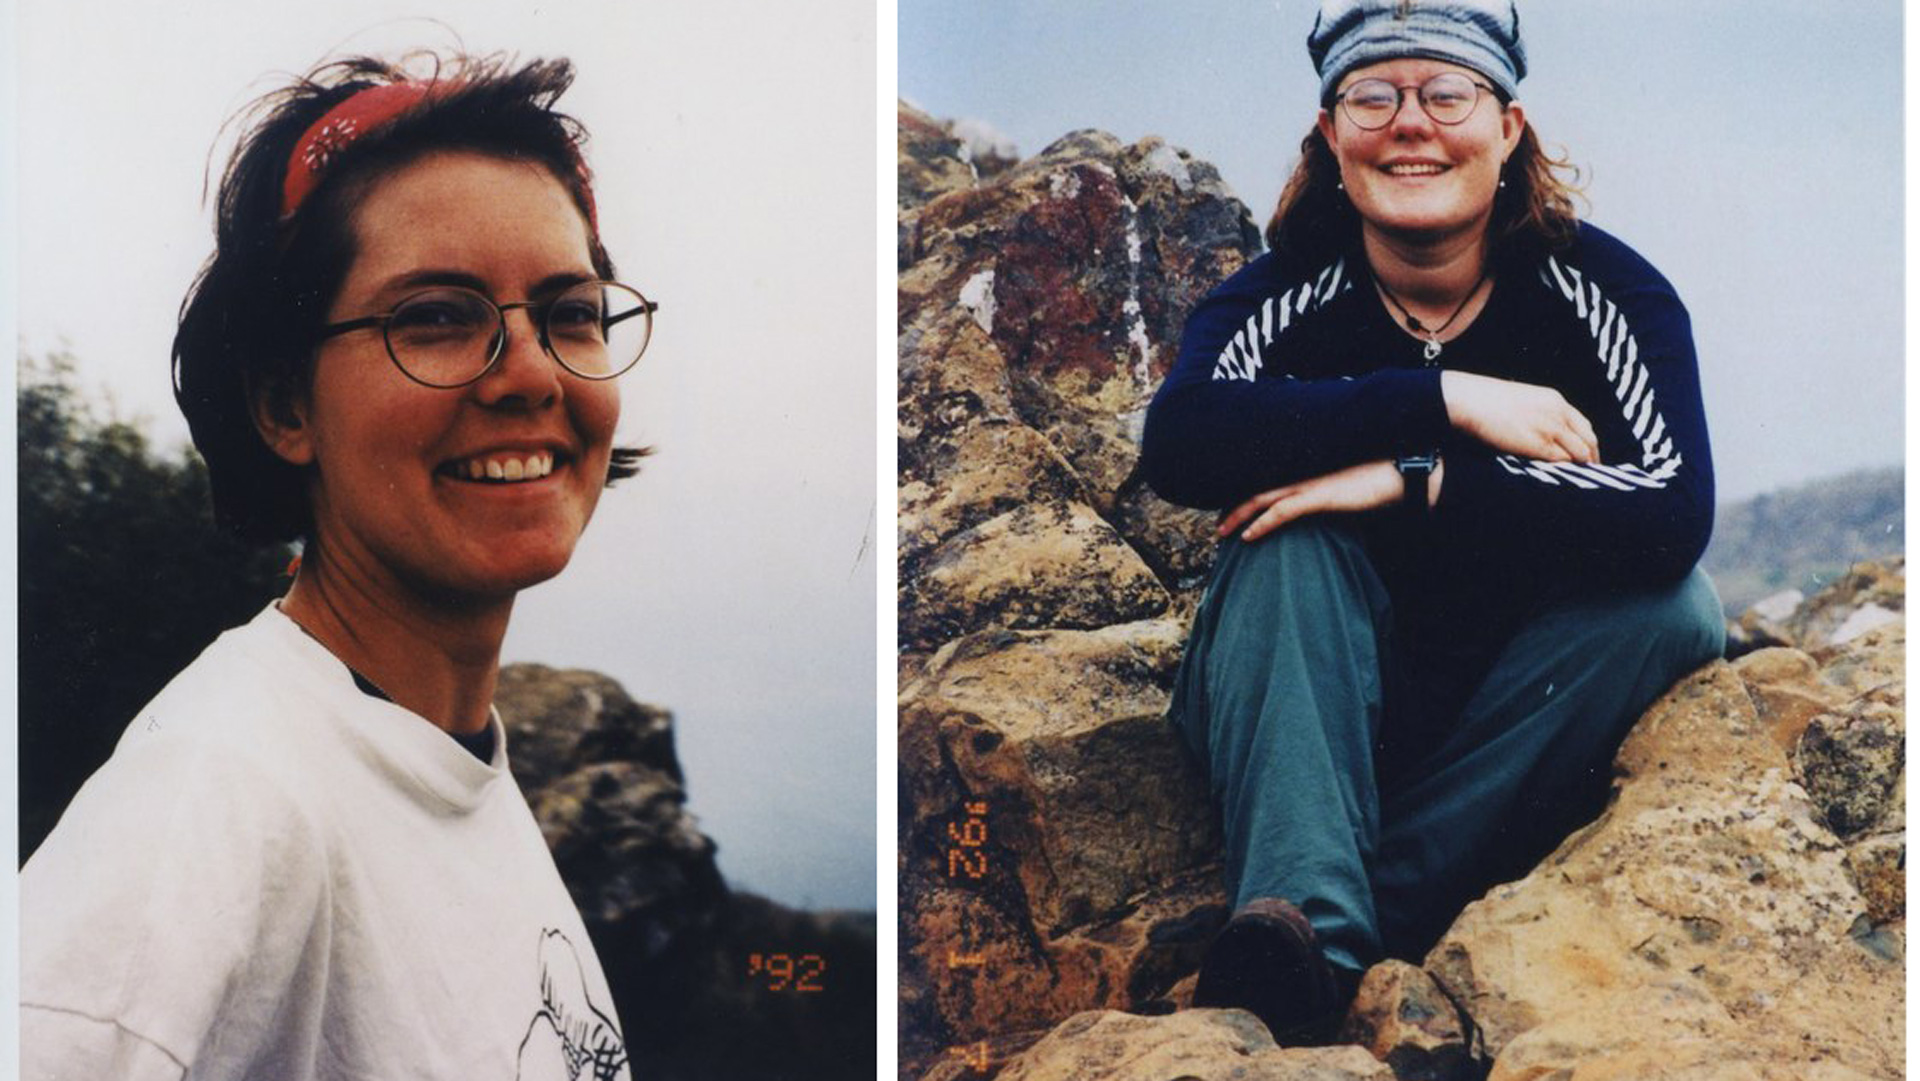 Murders in the Wild: Cold Cases in U.S. National Parks